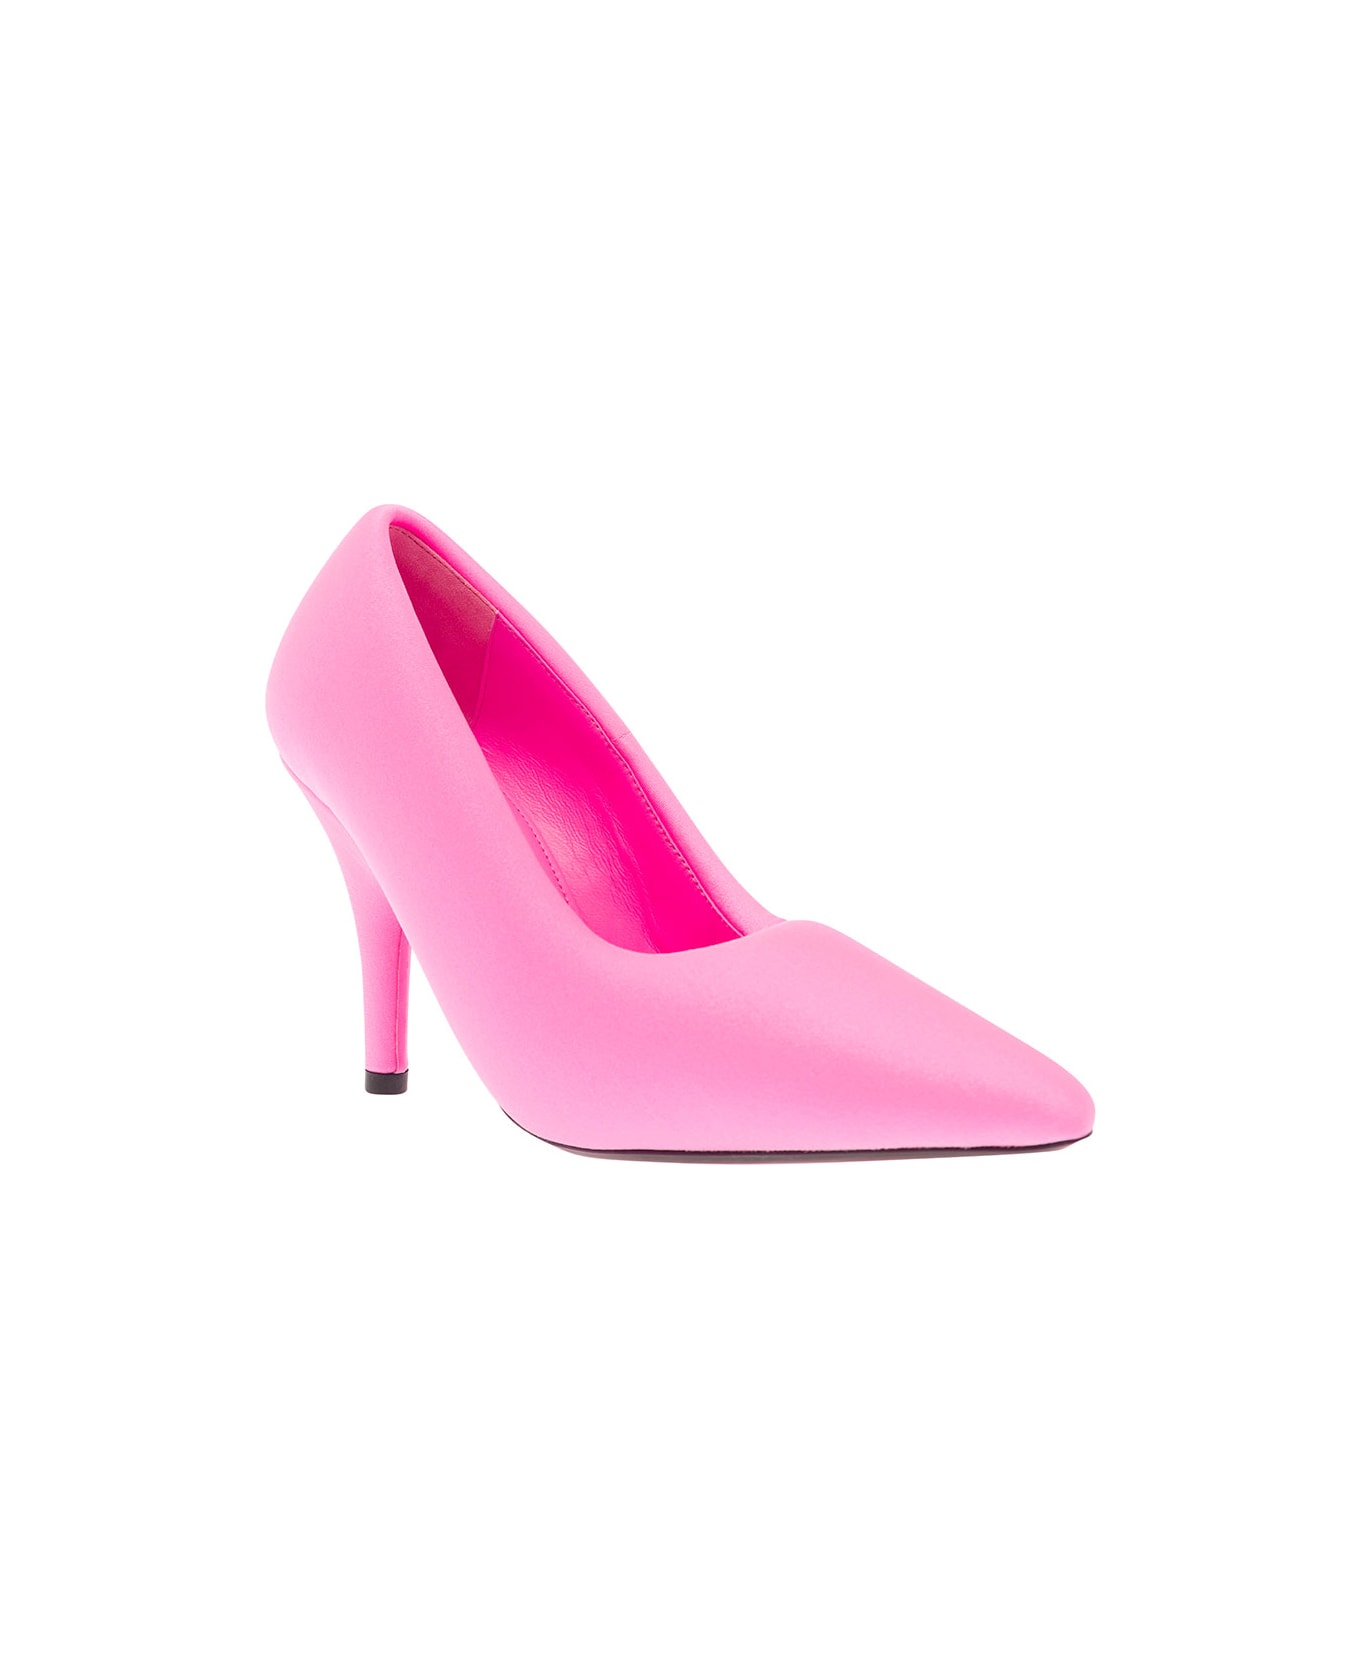 Balenciaga 'xl' Oversized Neon Pink Pump With Knife Heel In Spandex Woman - Pink